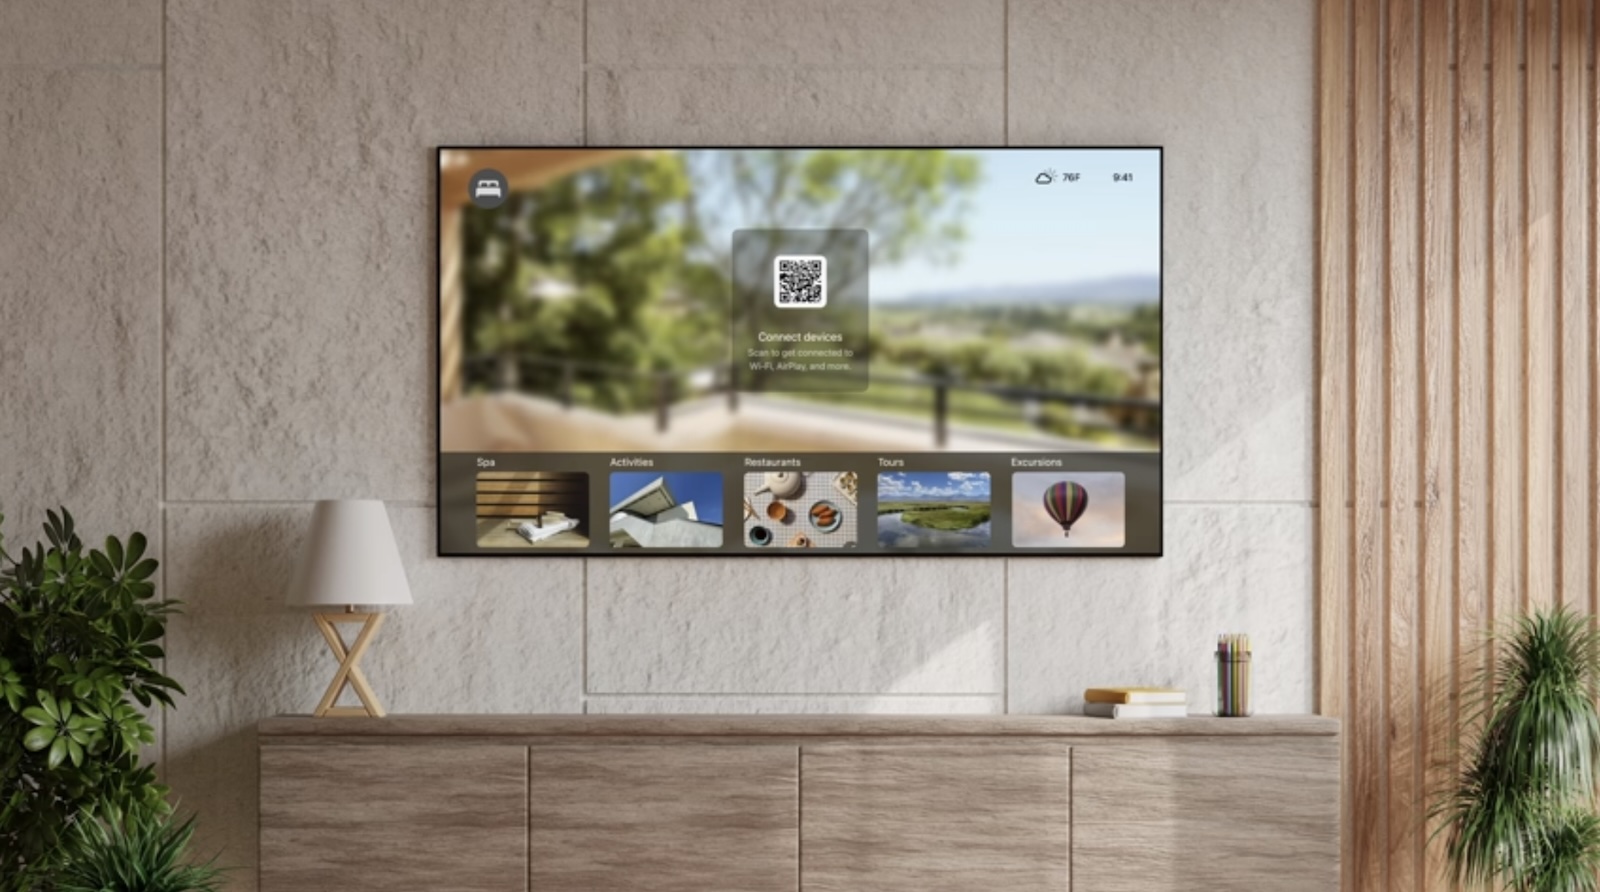 iOS 17's AirPlay Feature for Hotel Room TVs Now Available at Select Hotels